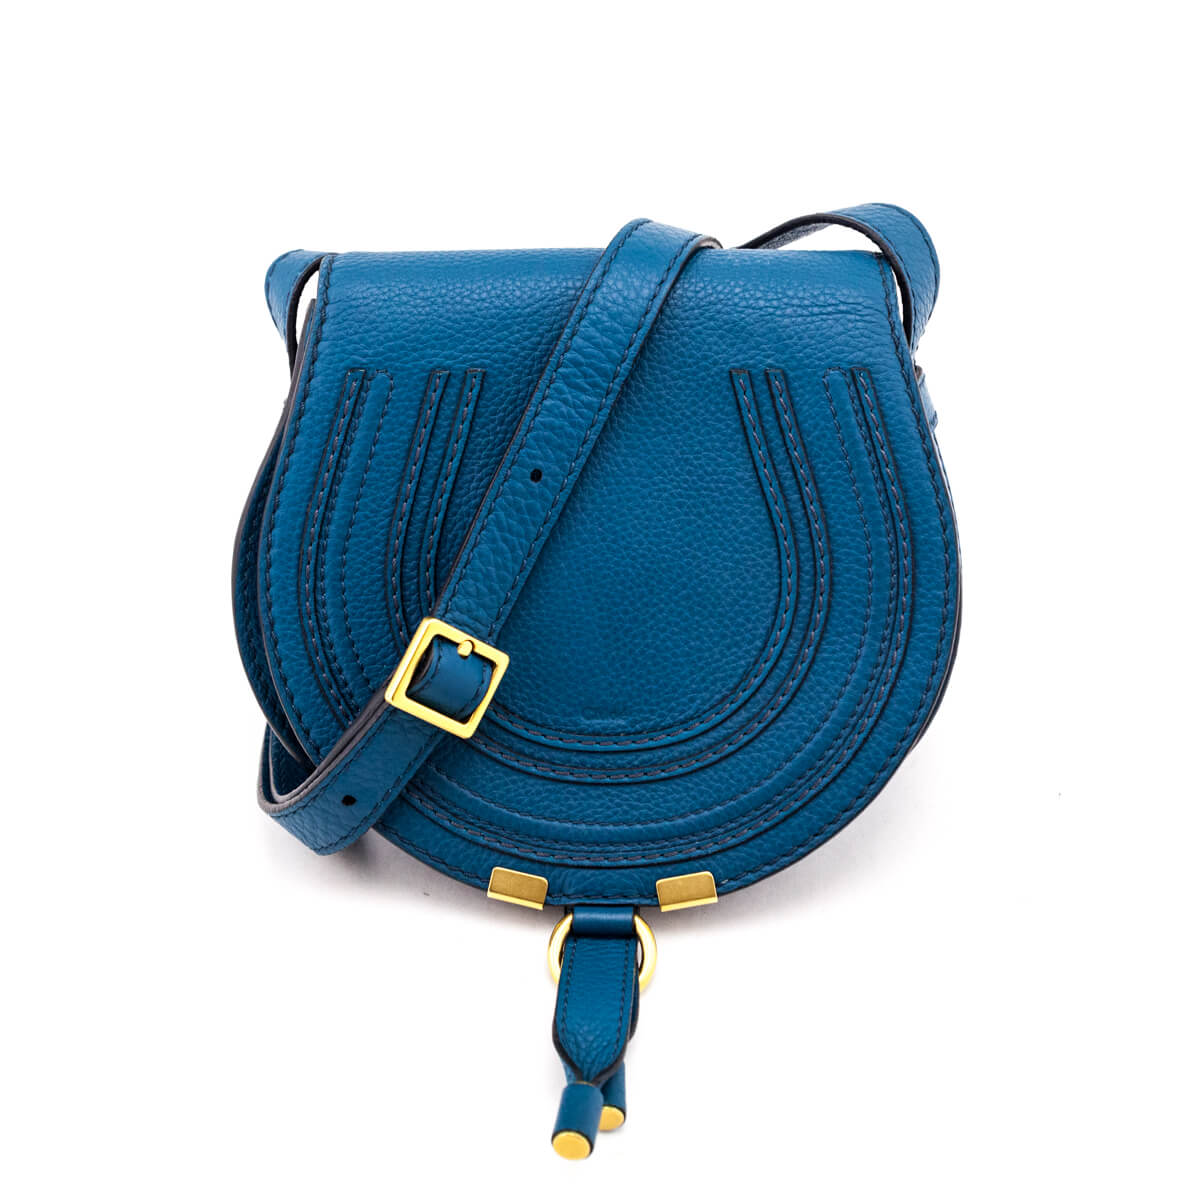 Chloe Teal Grained Calfskin Small Marcie Saddle Crossbody - Love that Bag etc - Preowned Authentic Designer Handbags & Preloved Fashions